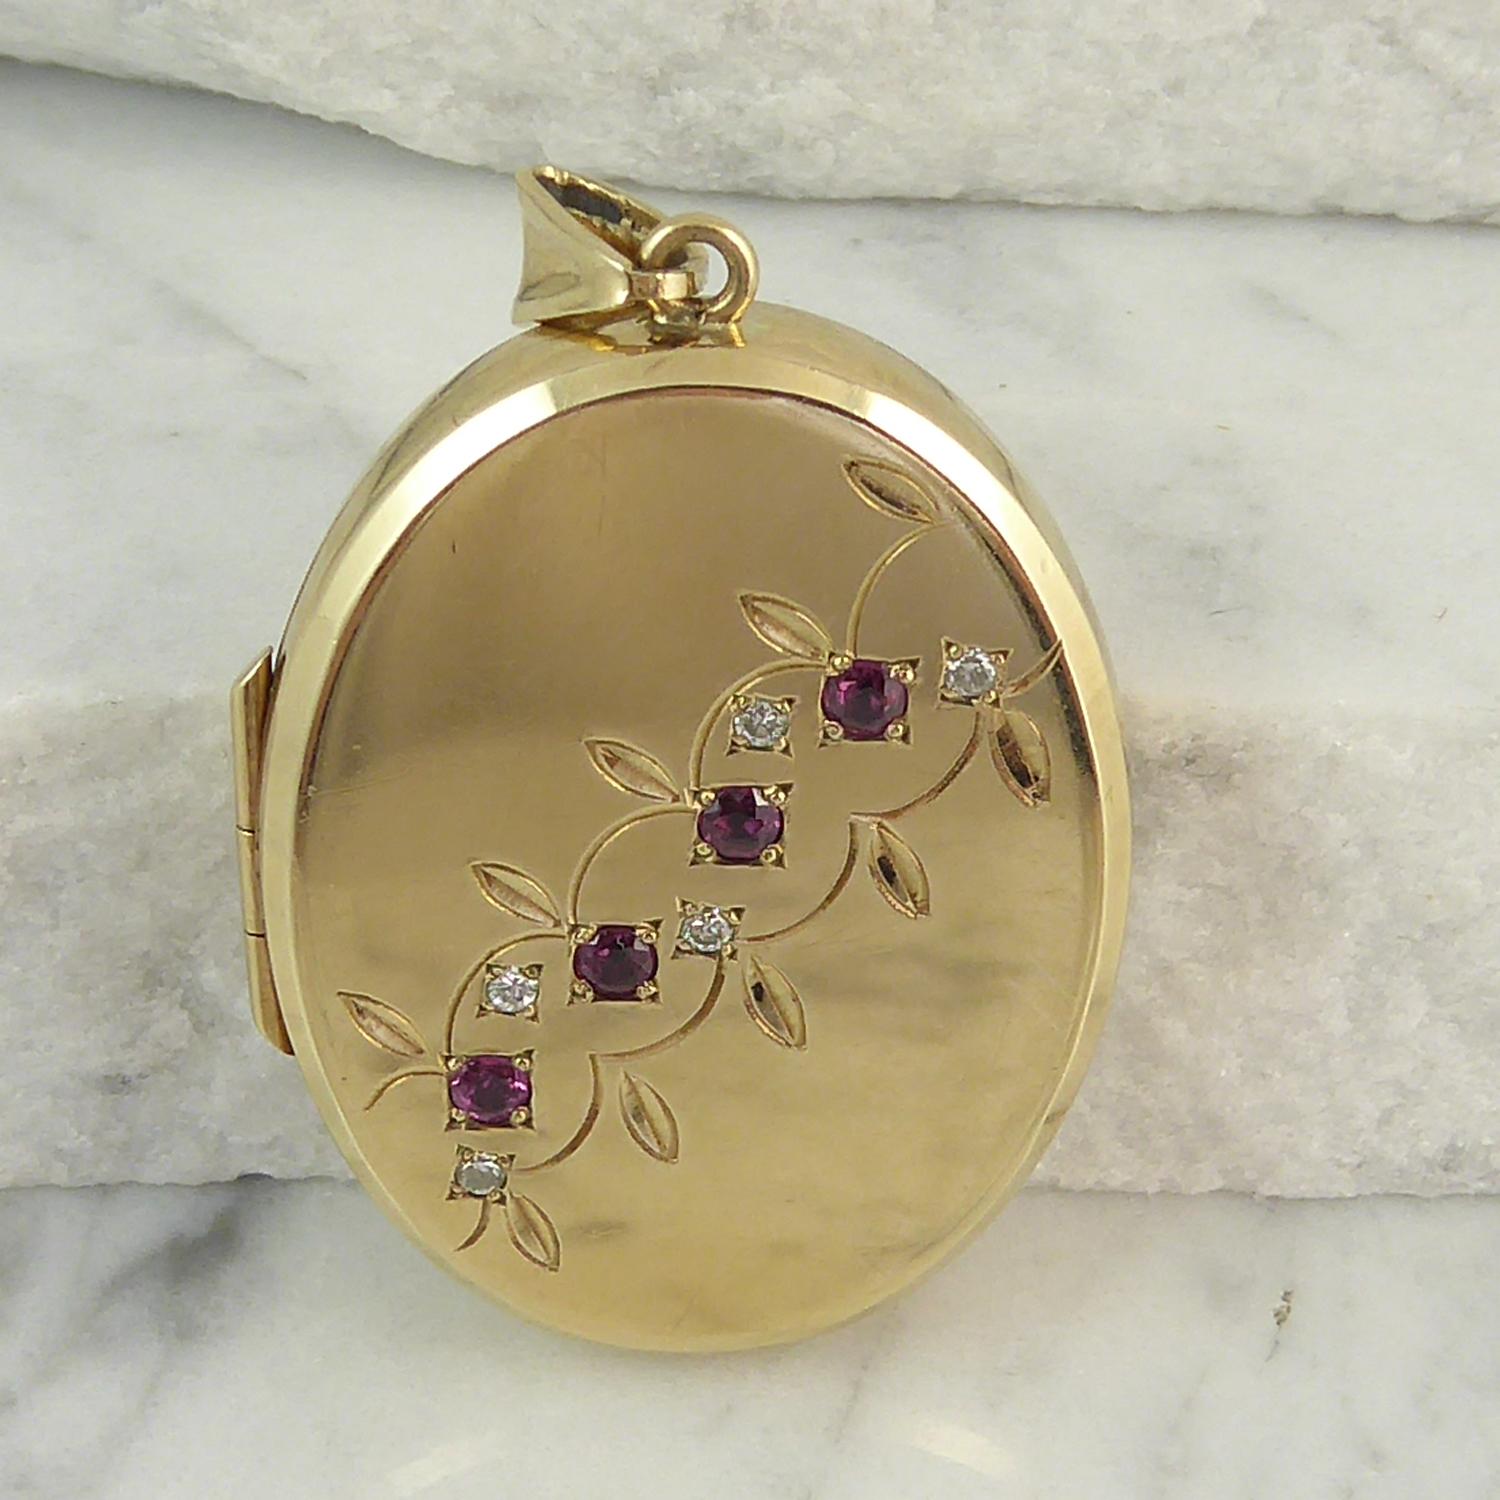 A vintage locket, oval shaped and with a bevelled edge, in plain polished 9ct yellow gold.  The front of the locket is set with a row of four rubies bead set in square mounts and arranged on a diagonal from top right to bottom left and with a